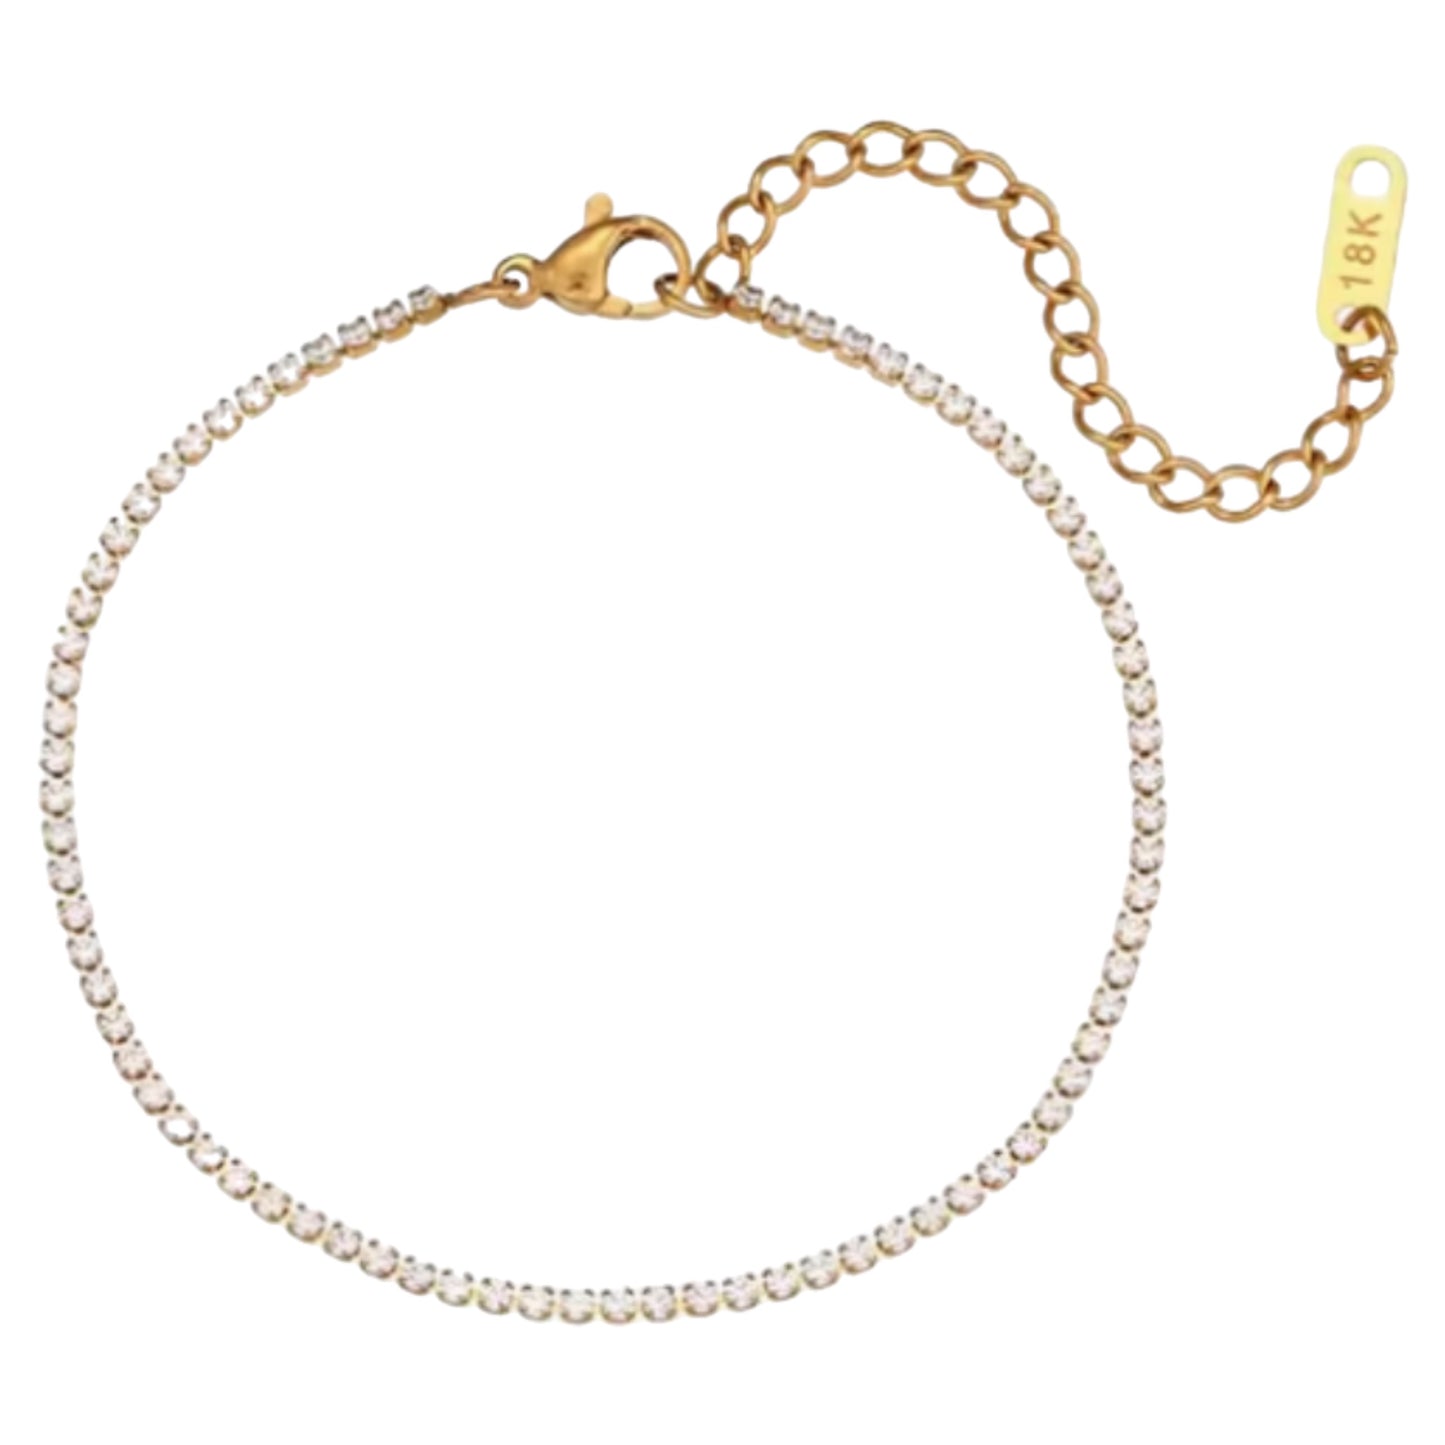 Tennis Bracelet Stainless Steel - Silver and Yellow Gold Available